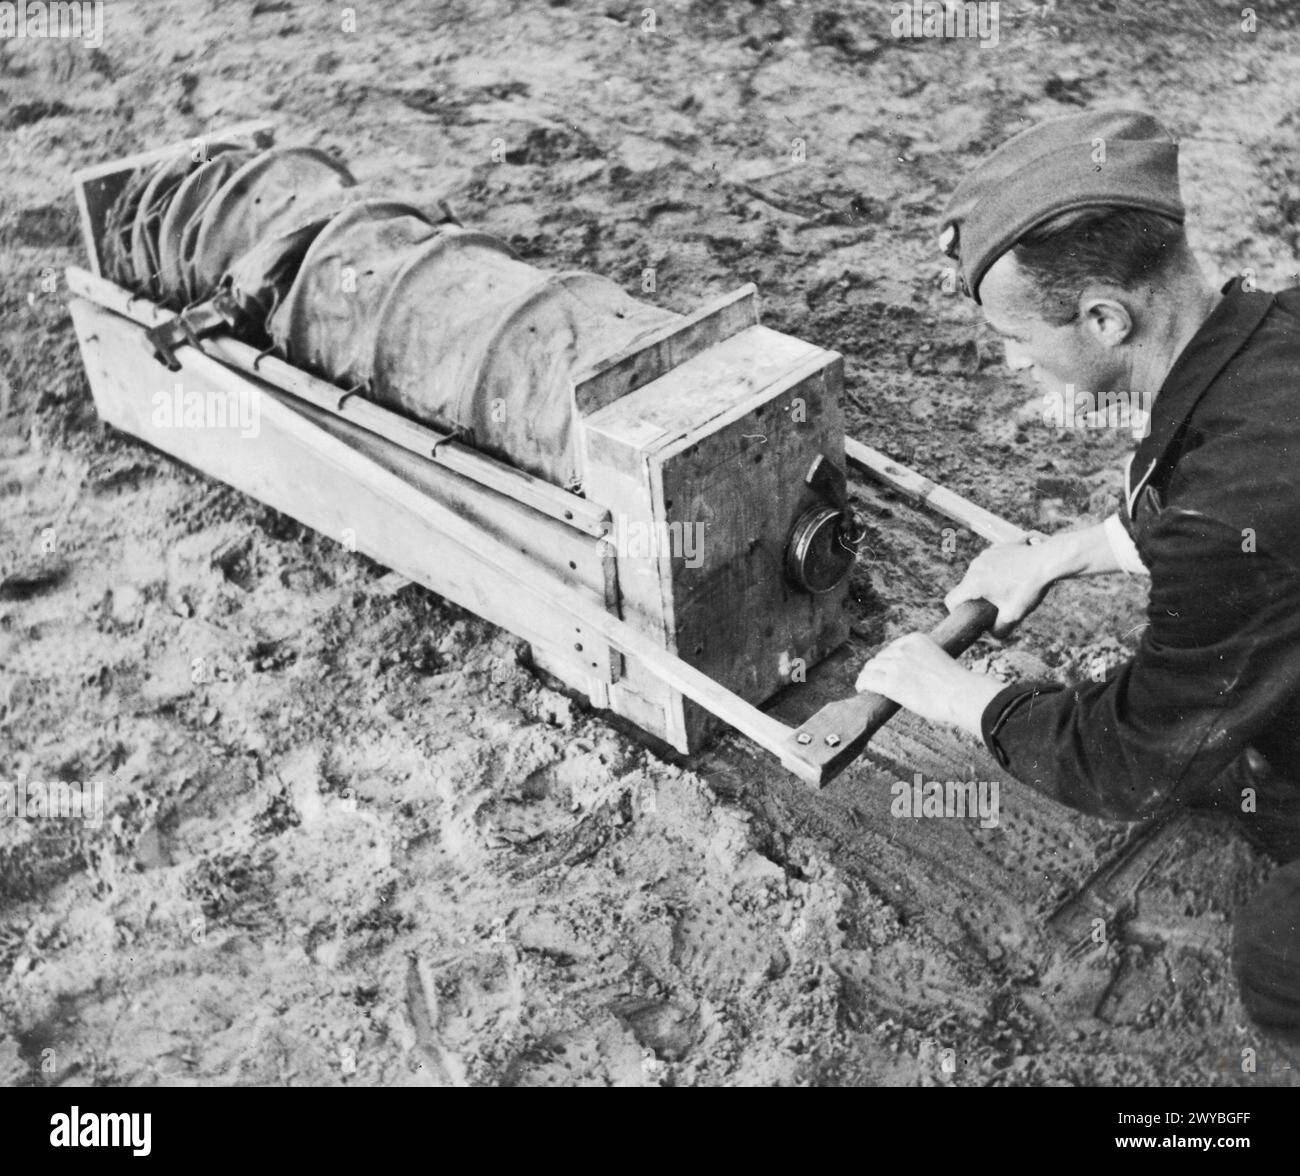 THE GREAT ESCAPE, MARCH 1944 - Corporal Karl Greise, one of the German guards known as 'Rubberneck', demonstrating a device used for pumping air into the 'Harry' escape tunnel at Stalag Luft III, Sagan. Photograph probably taken in late March 1944. , Royal Air Force, German Air Force, Greise, Karl Stock Photo